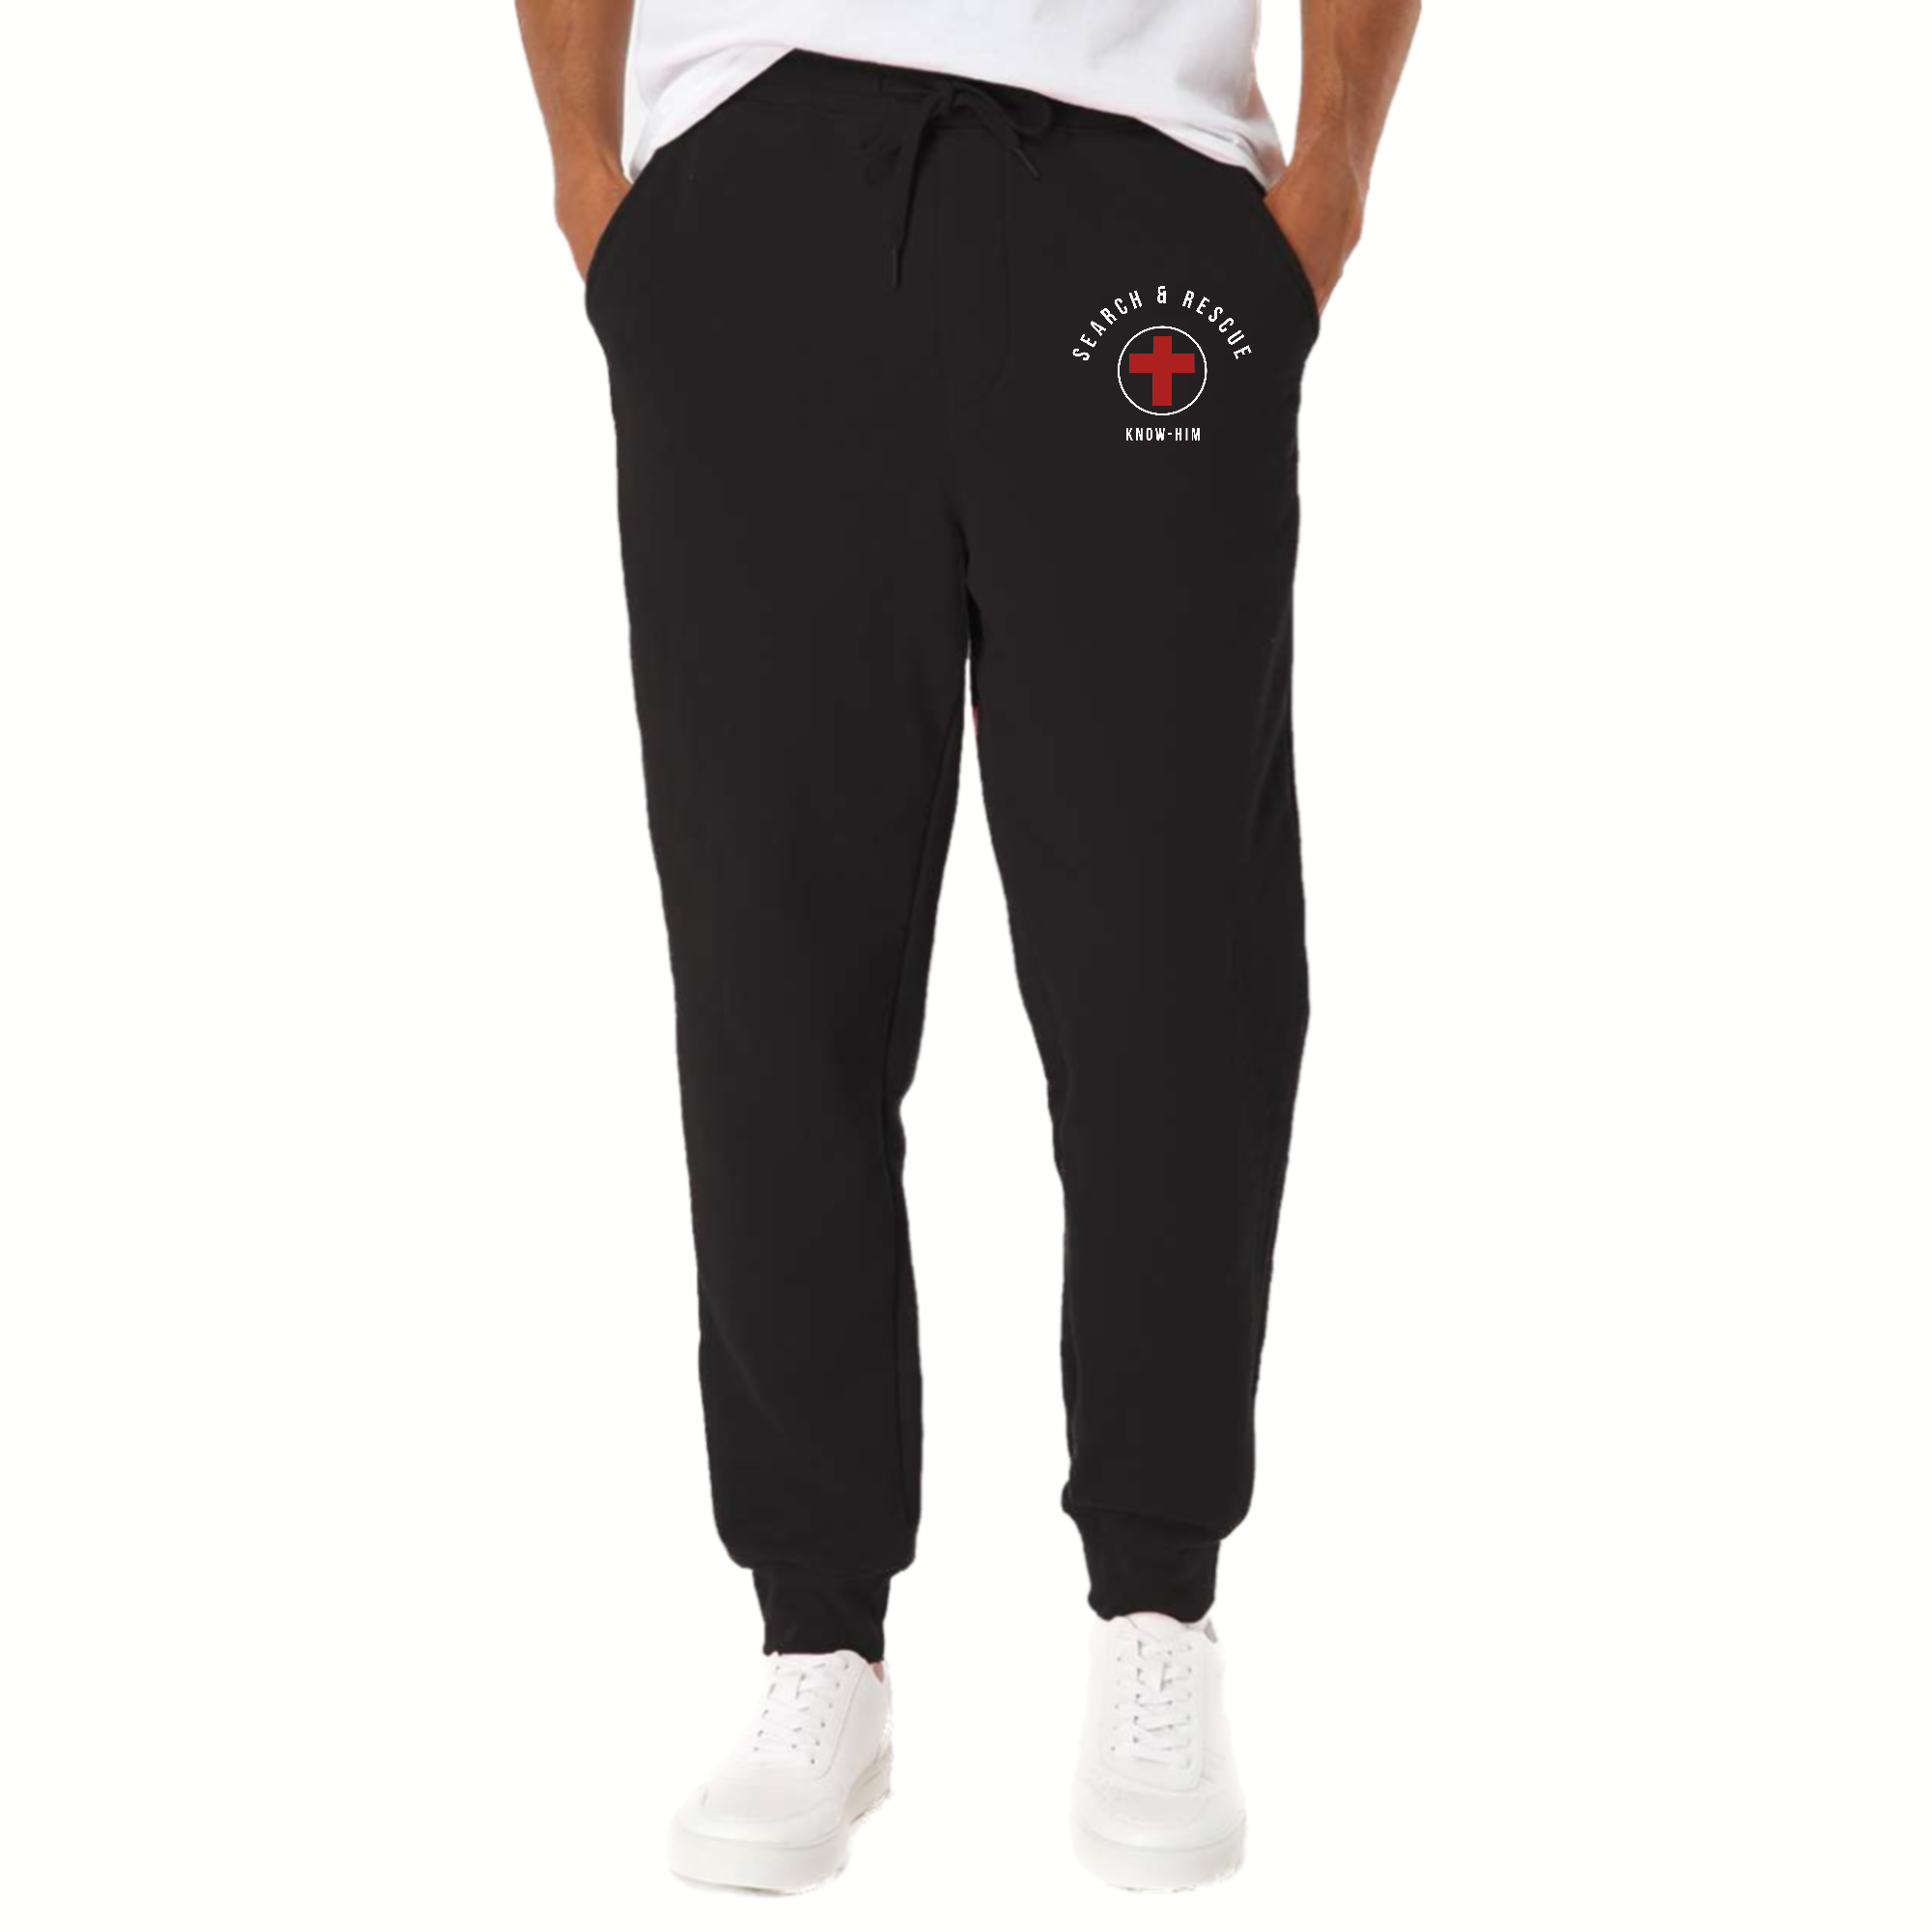 Search and Rescue (Black) - Sweatpants